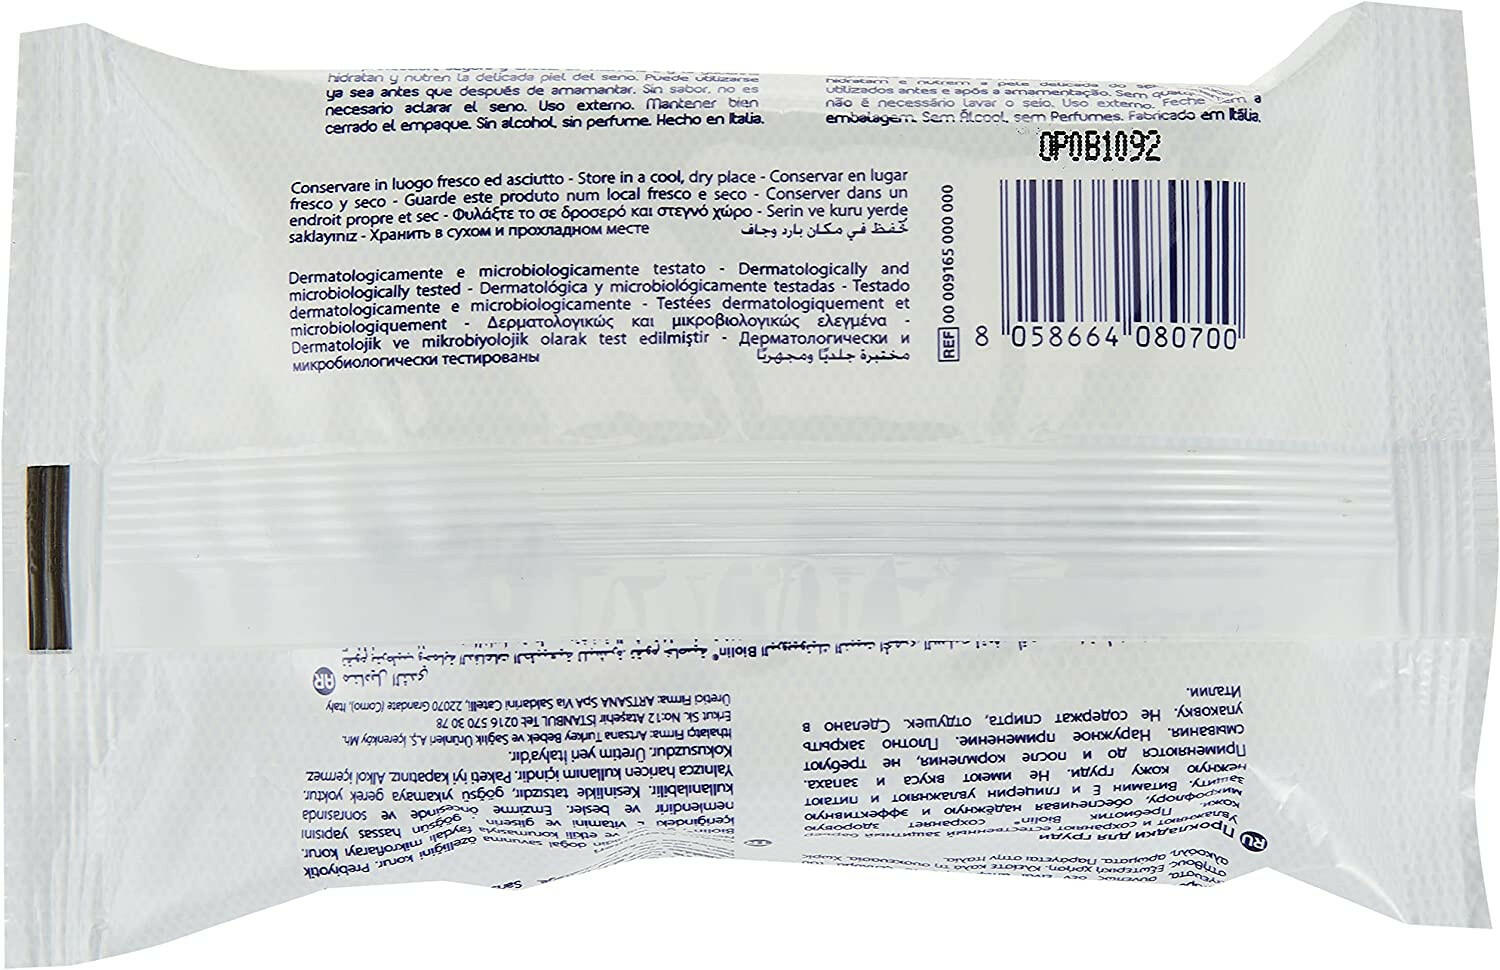 Chicco Cleansing Breast Wipes 16's.